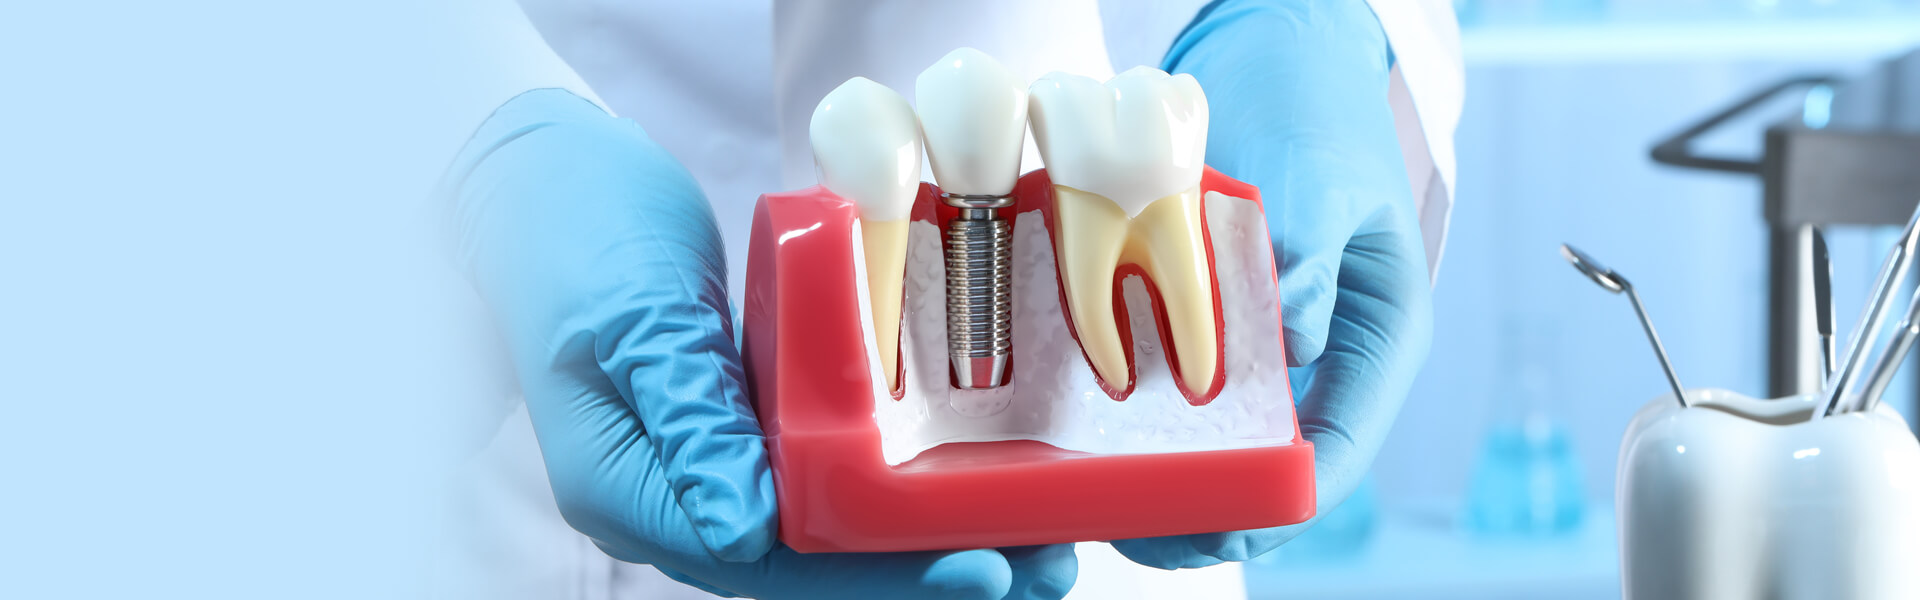 Dental Implants in Forty Fort, PA